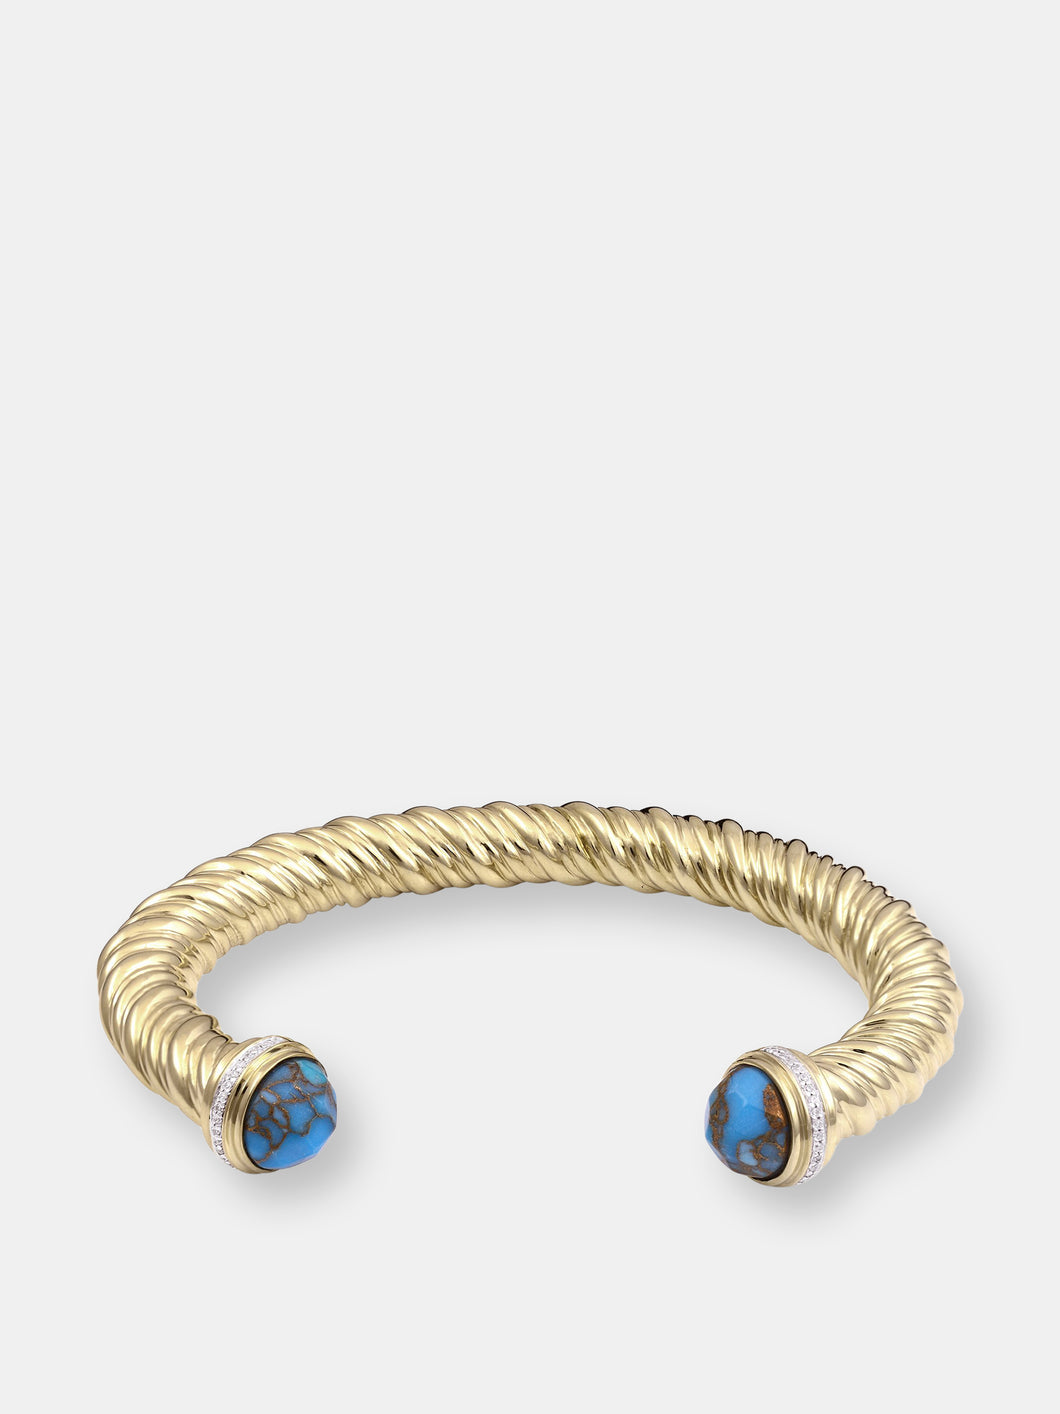 Summer Nights Turquoise & Diamond Cuff In 14K Yellow Gold Plated Sterling Silver